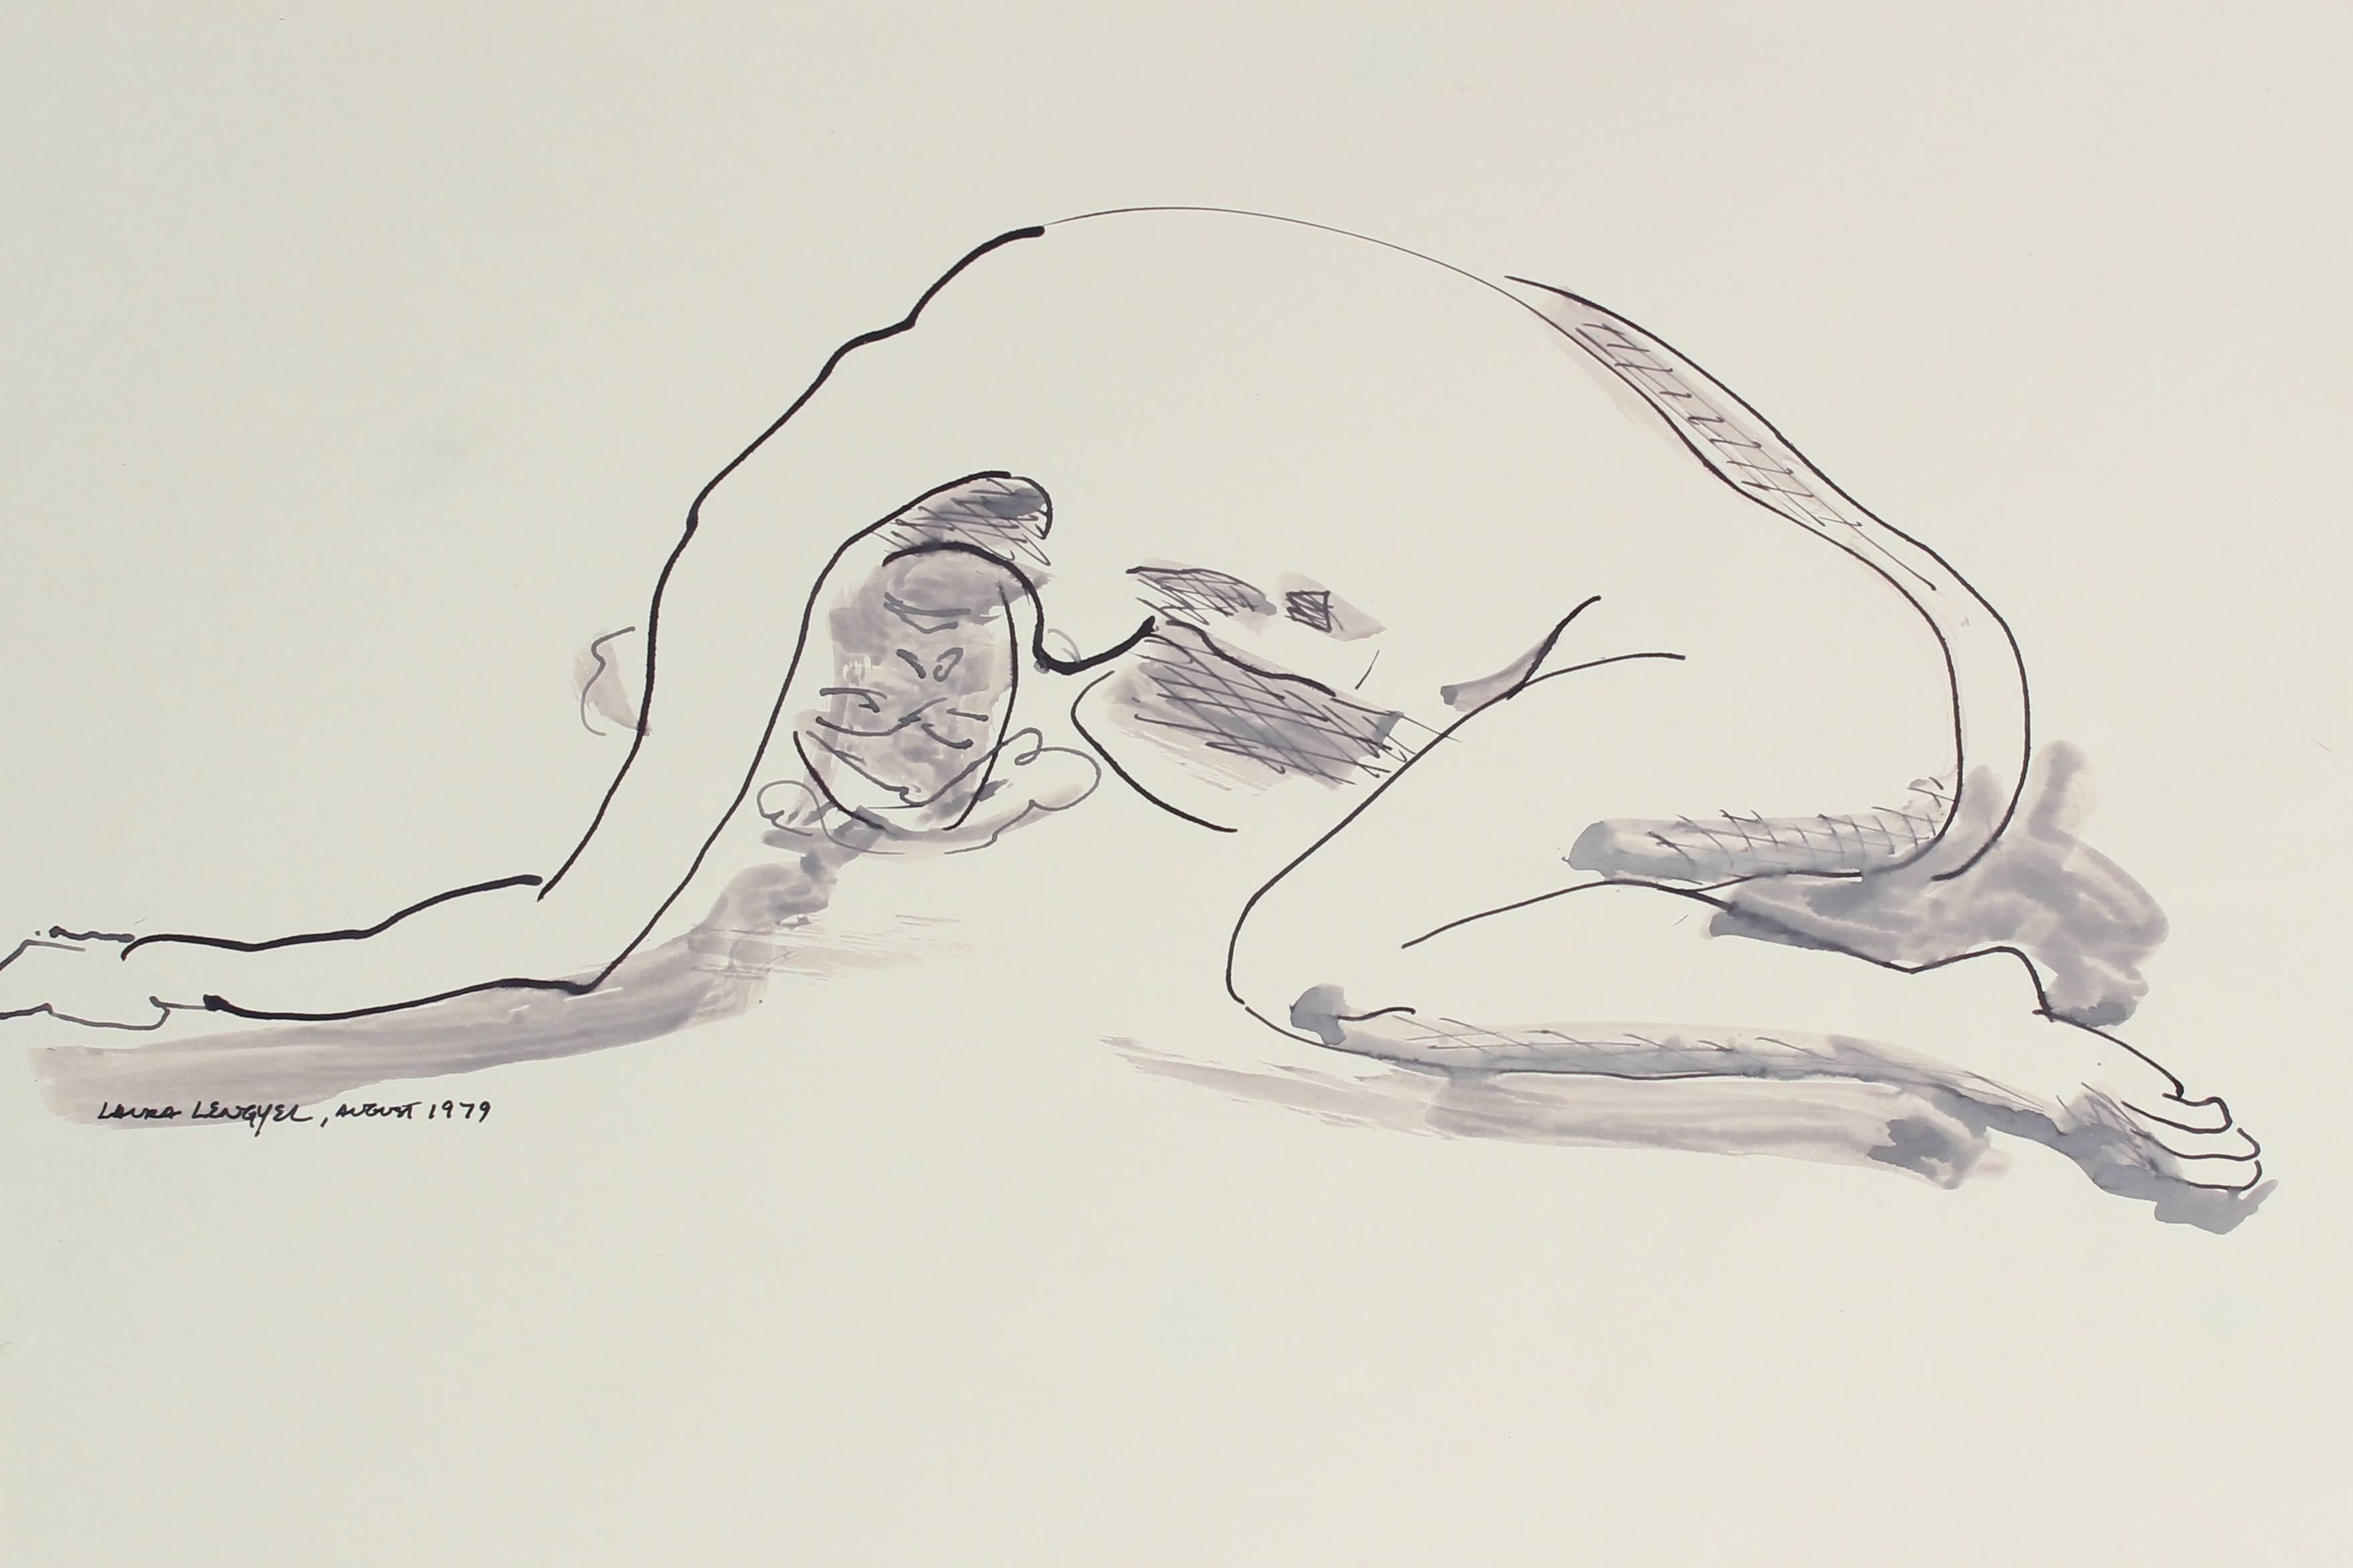 Monochromatic Nude Drawing in Ink, 1979 - Art by Laura Lengyel